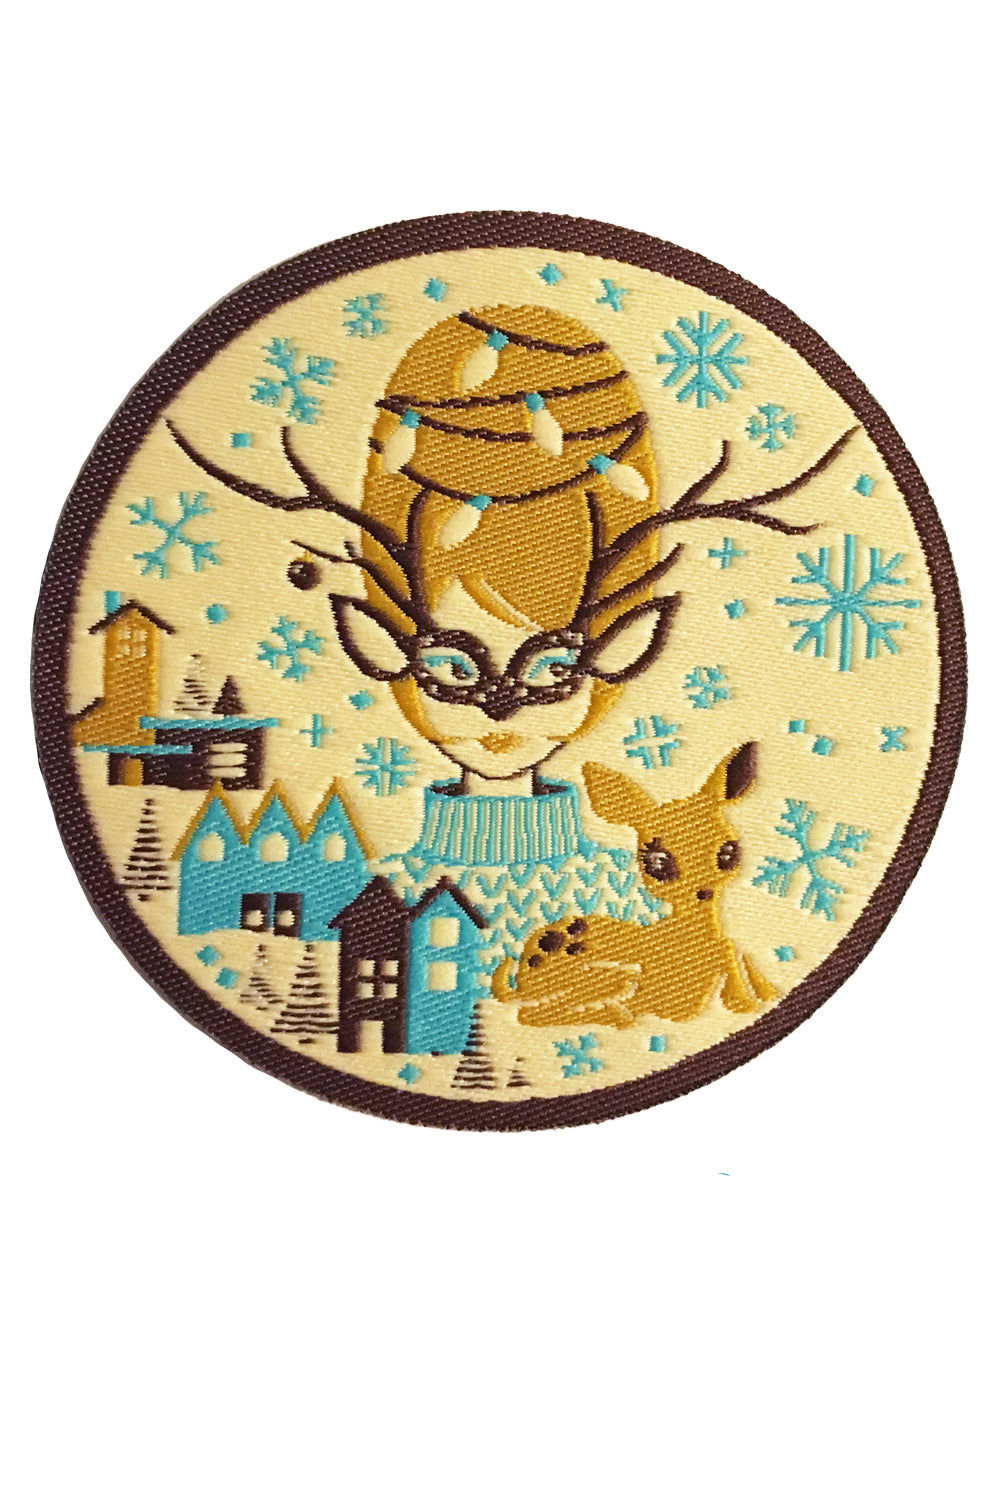 Round iron on patch with brown, gold and aqua print of Christmas girl with beehive hair, deer and putz houses